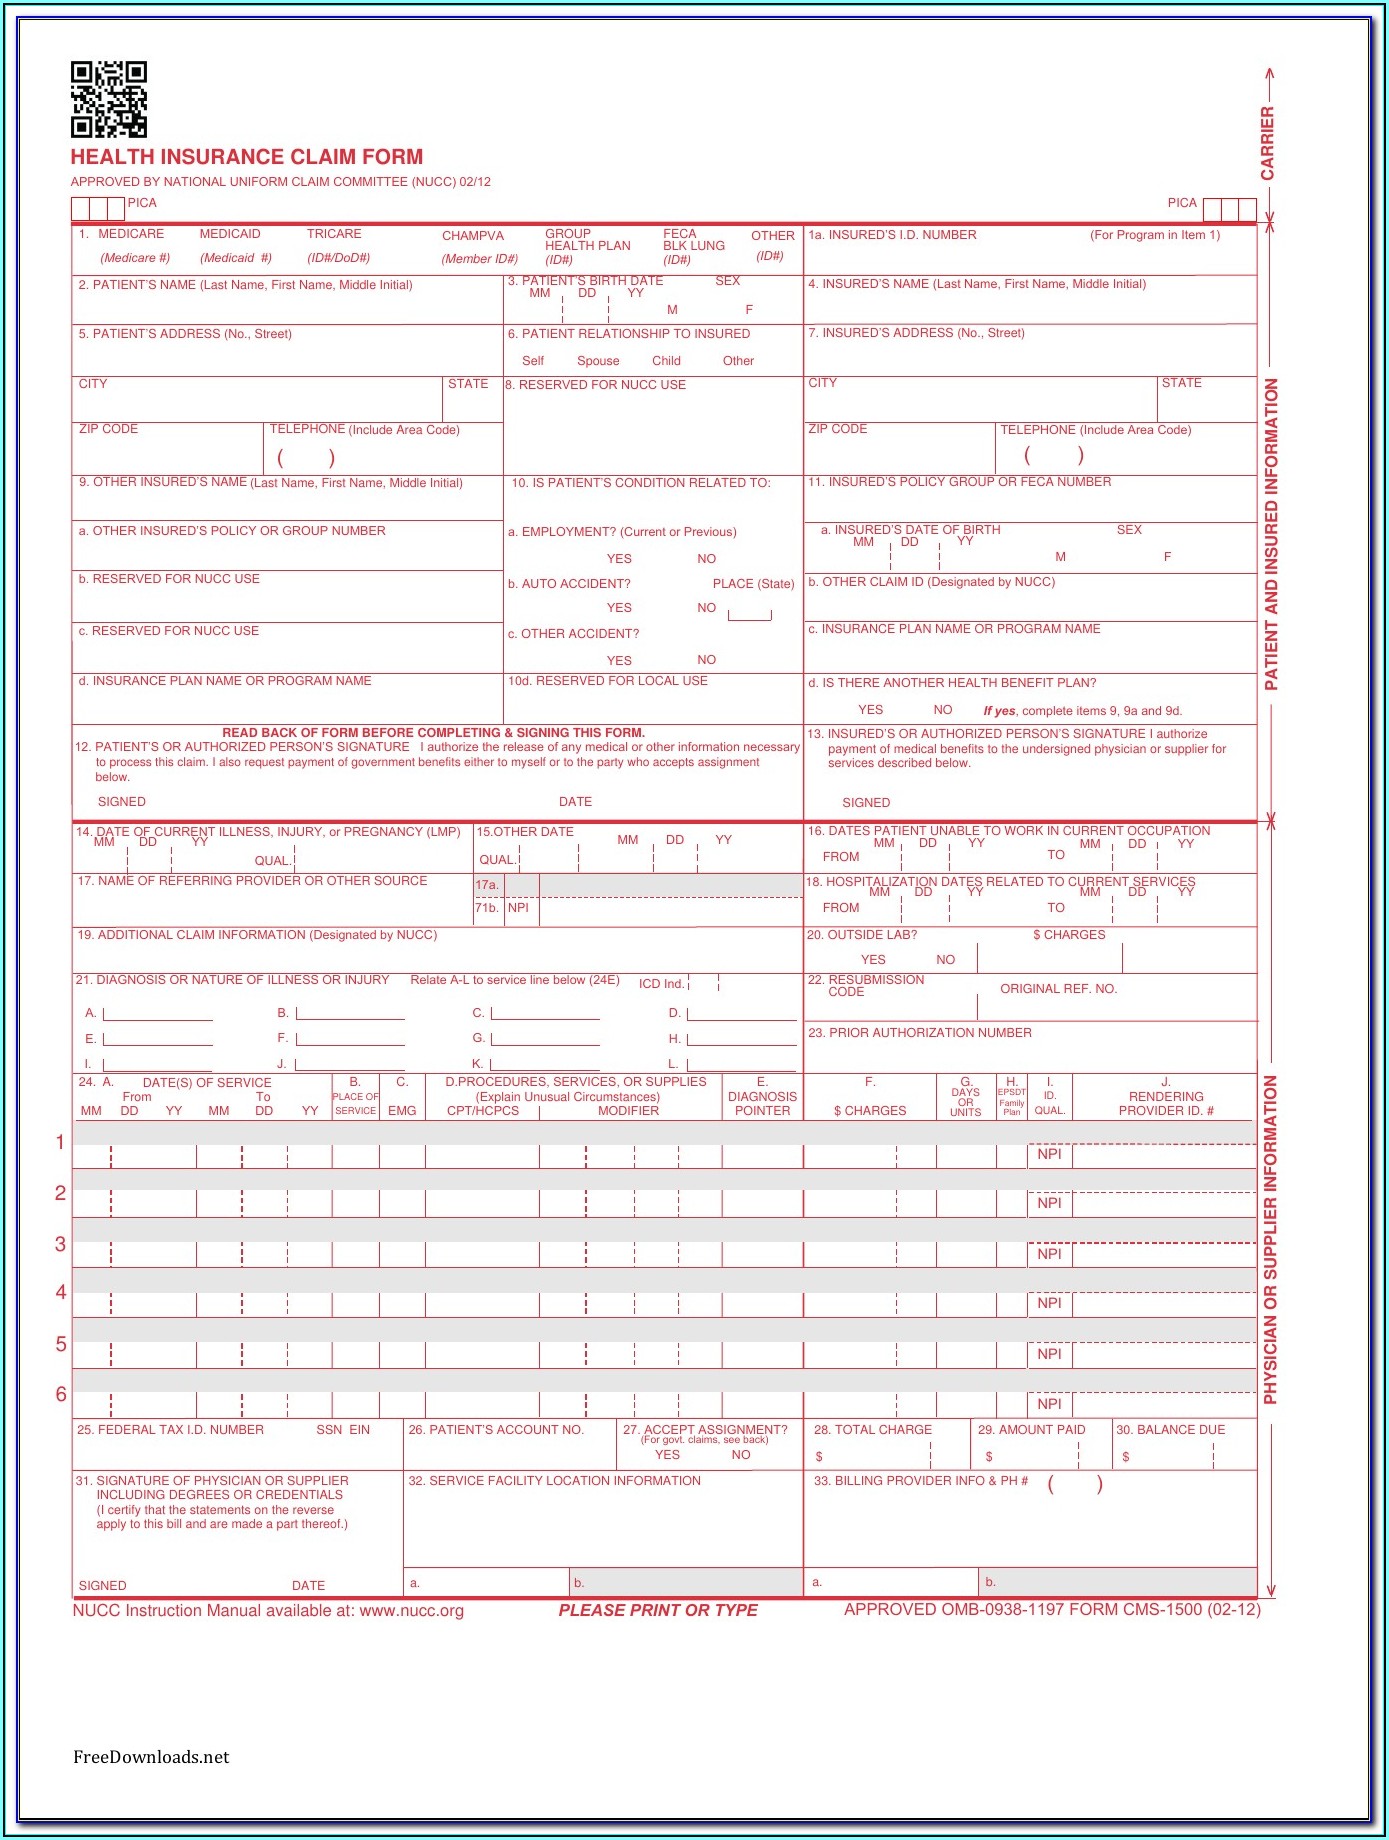 Cms 1500 Form Fillable Free 2018